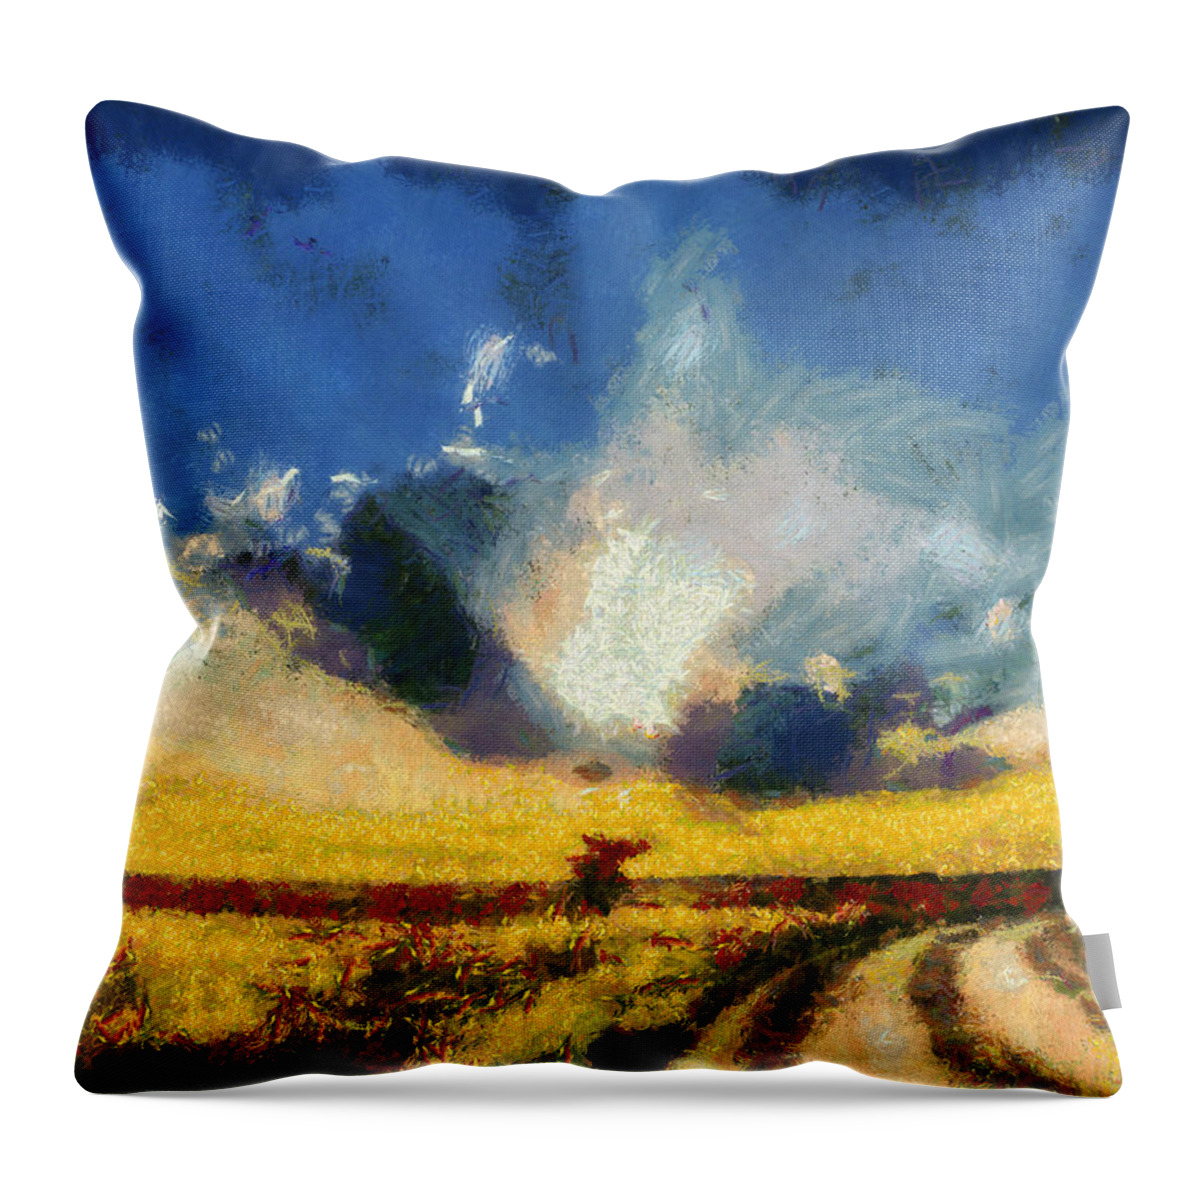 Www.themidnightstreets.net Throw Pillow featuring the painting Back To Goodbye by Joe Misrasi